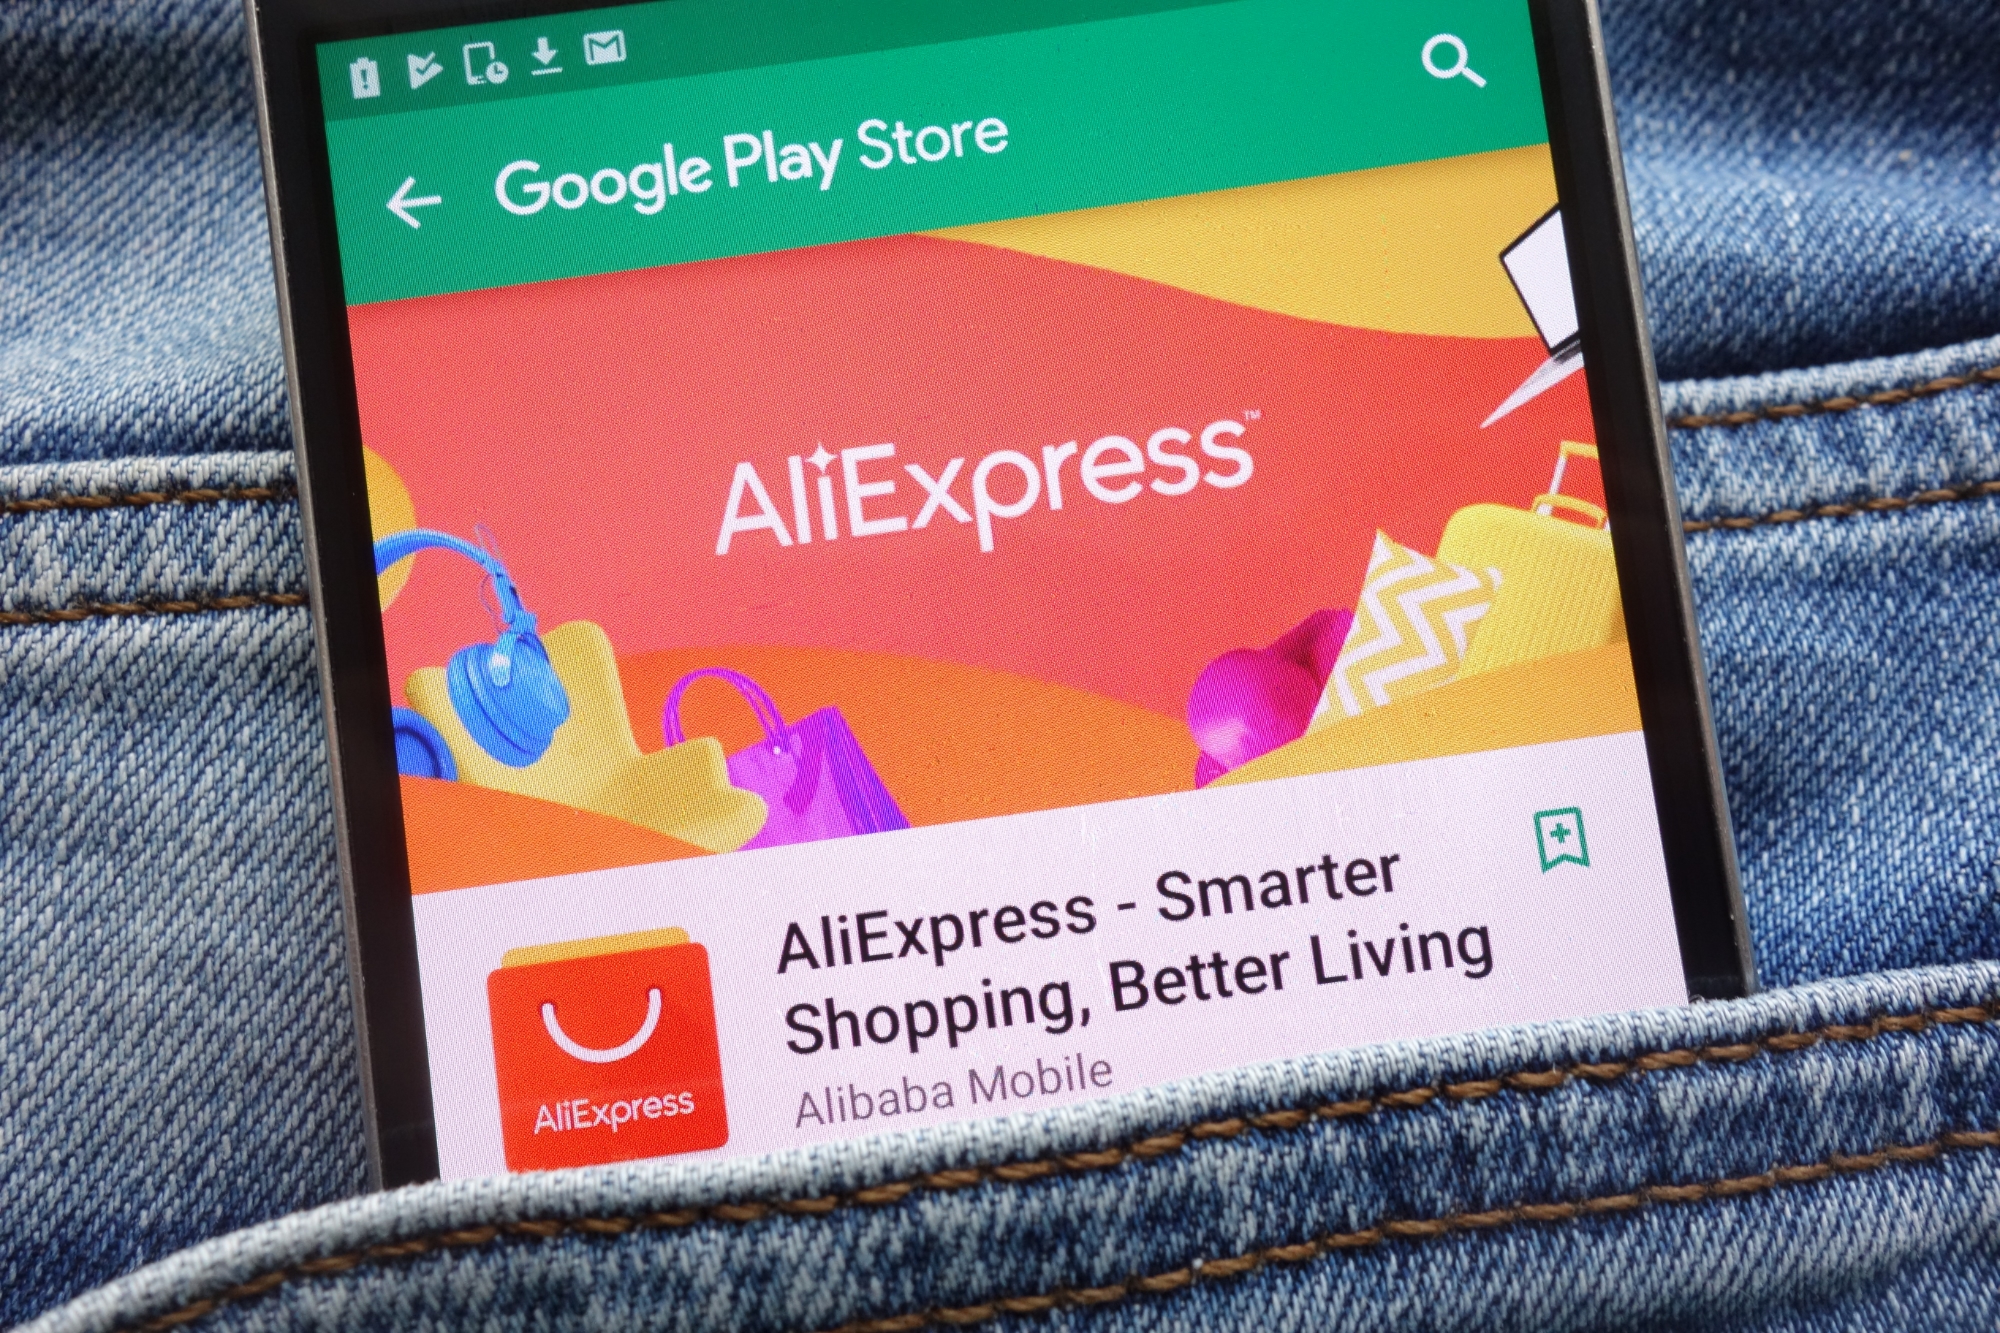 Promo codes for new AliExpress users